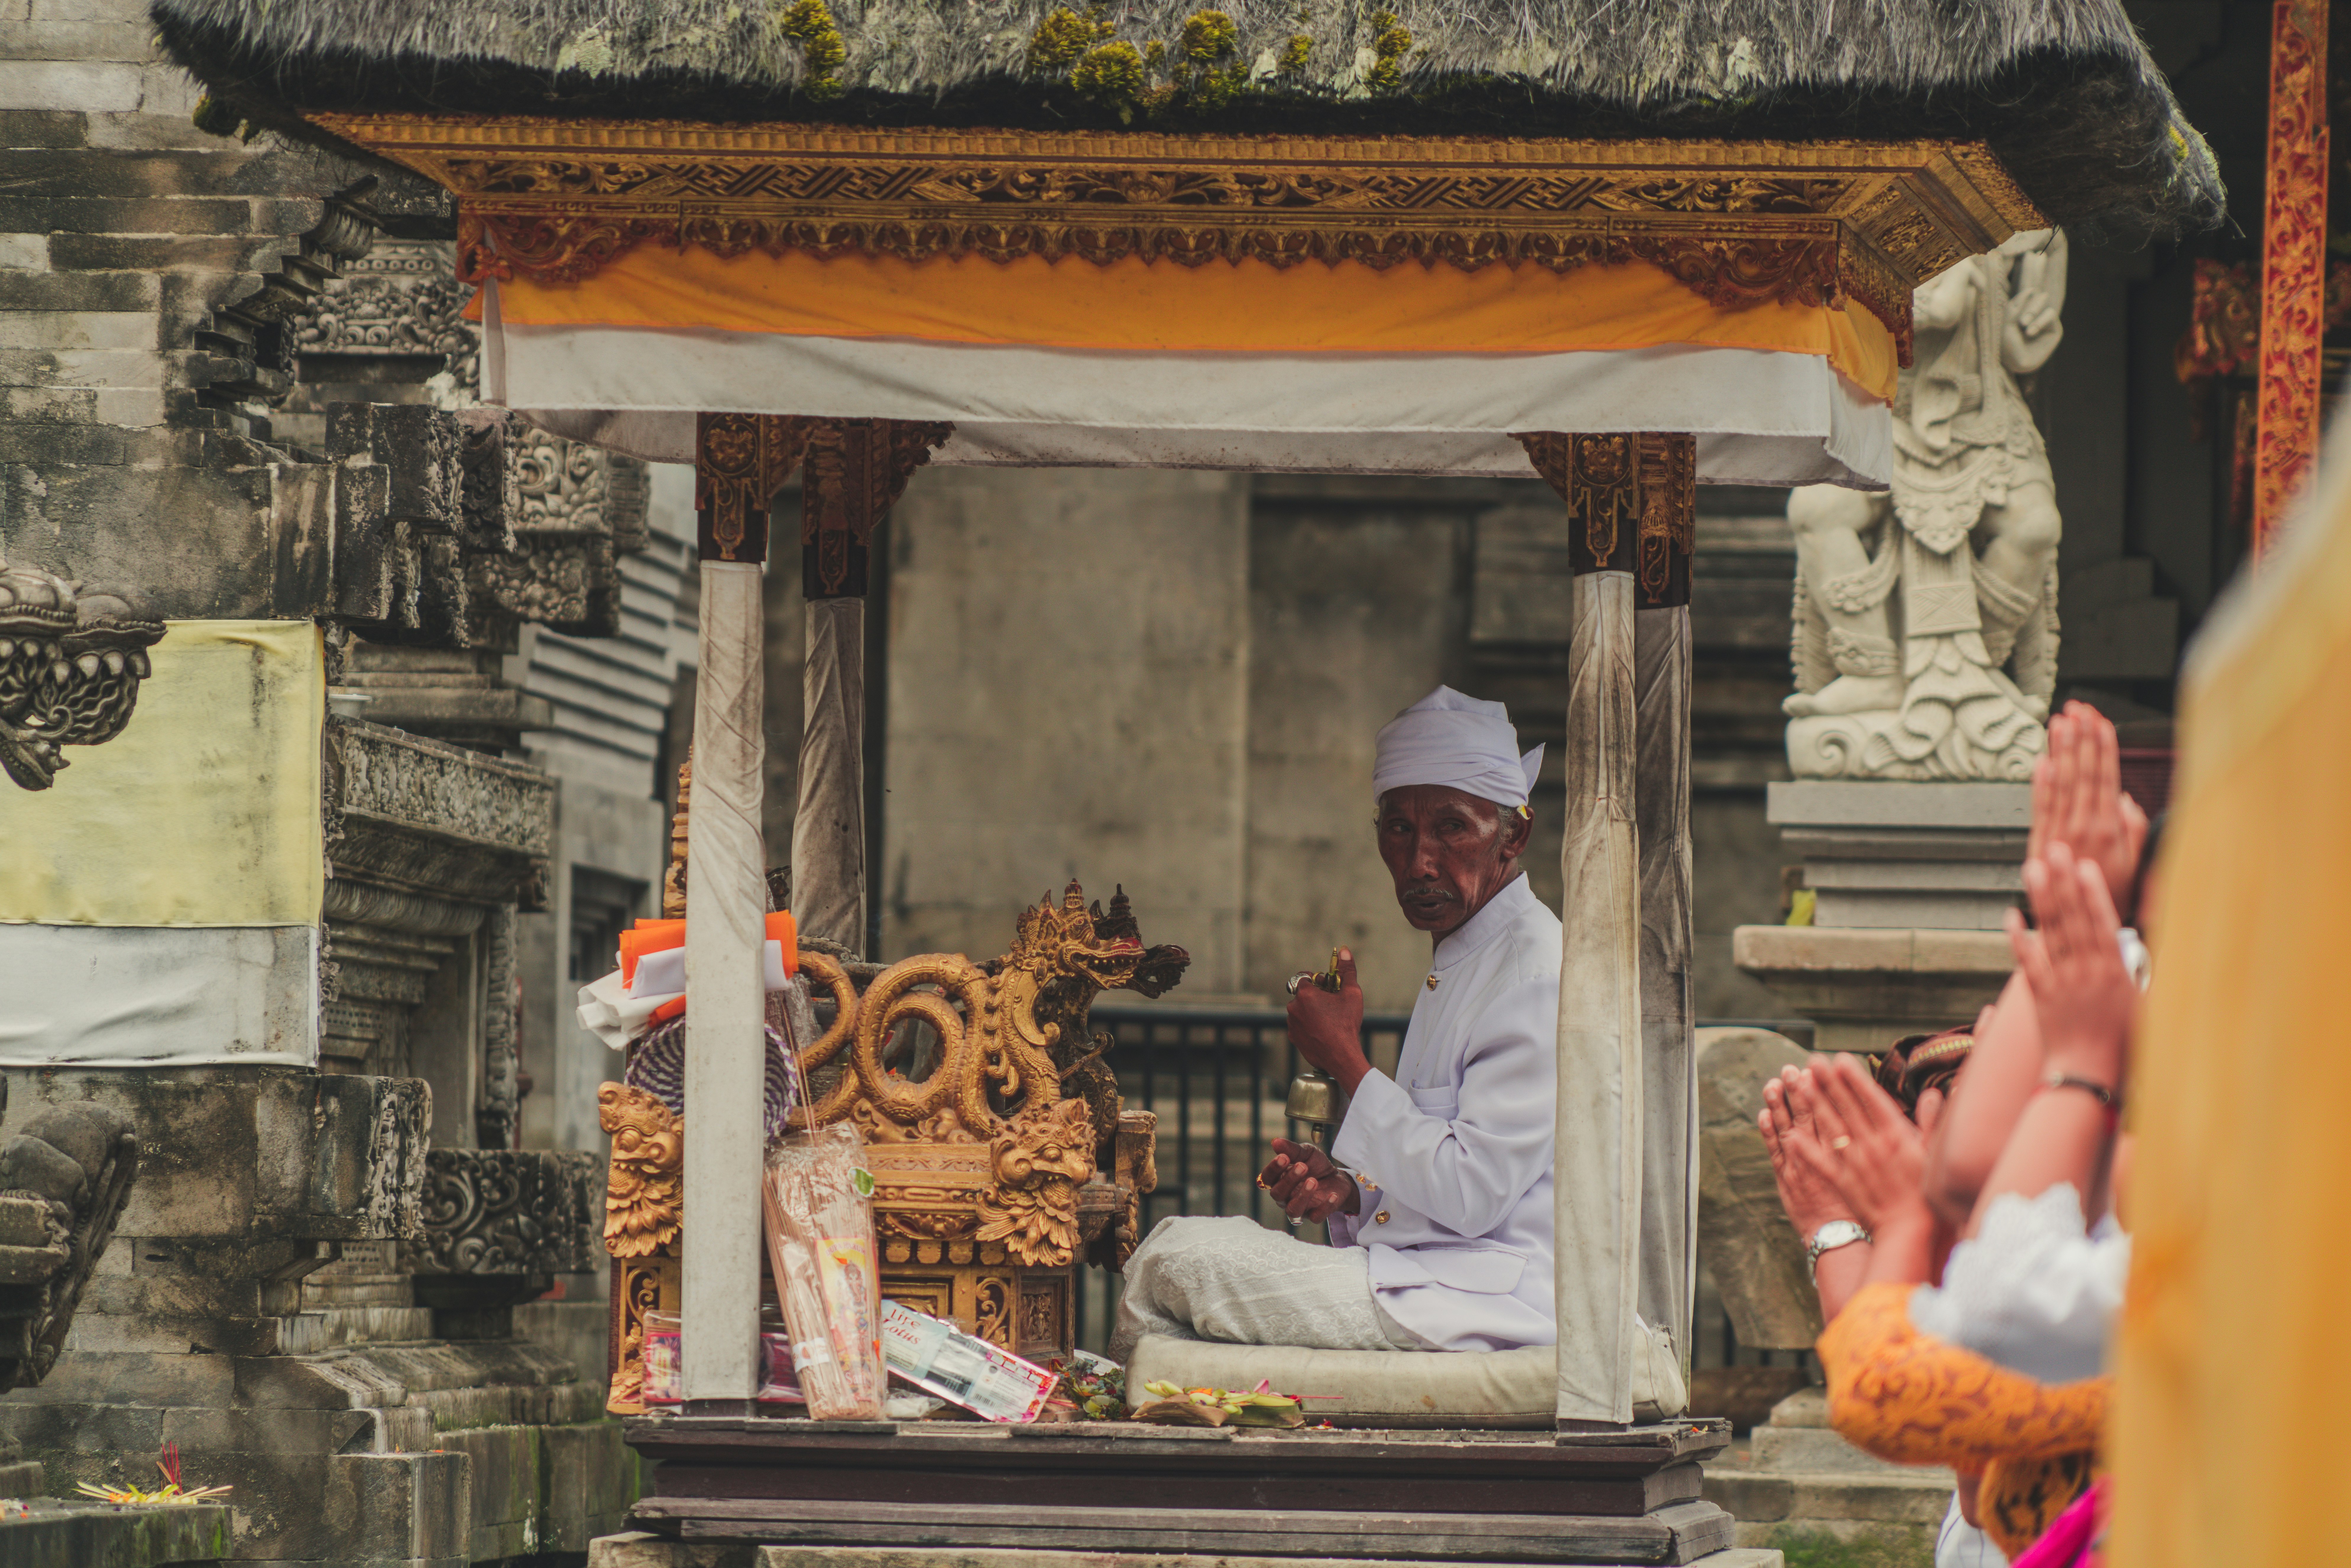 An religious ceremony in Bali